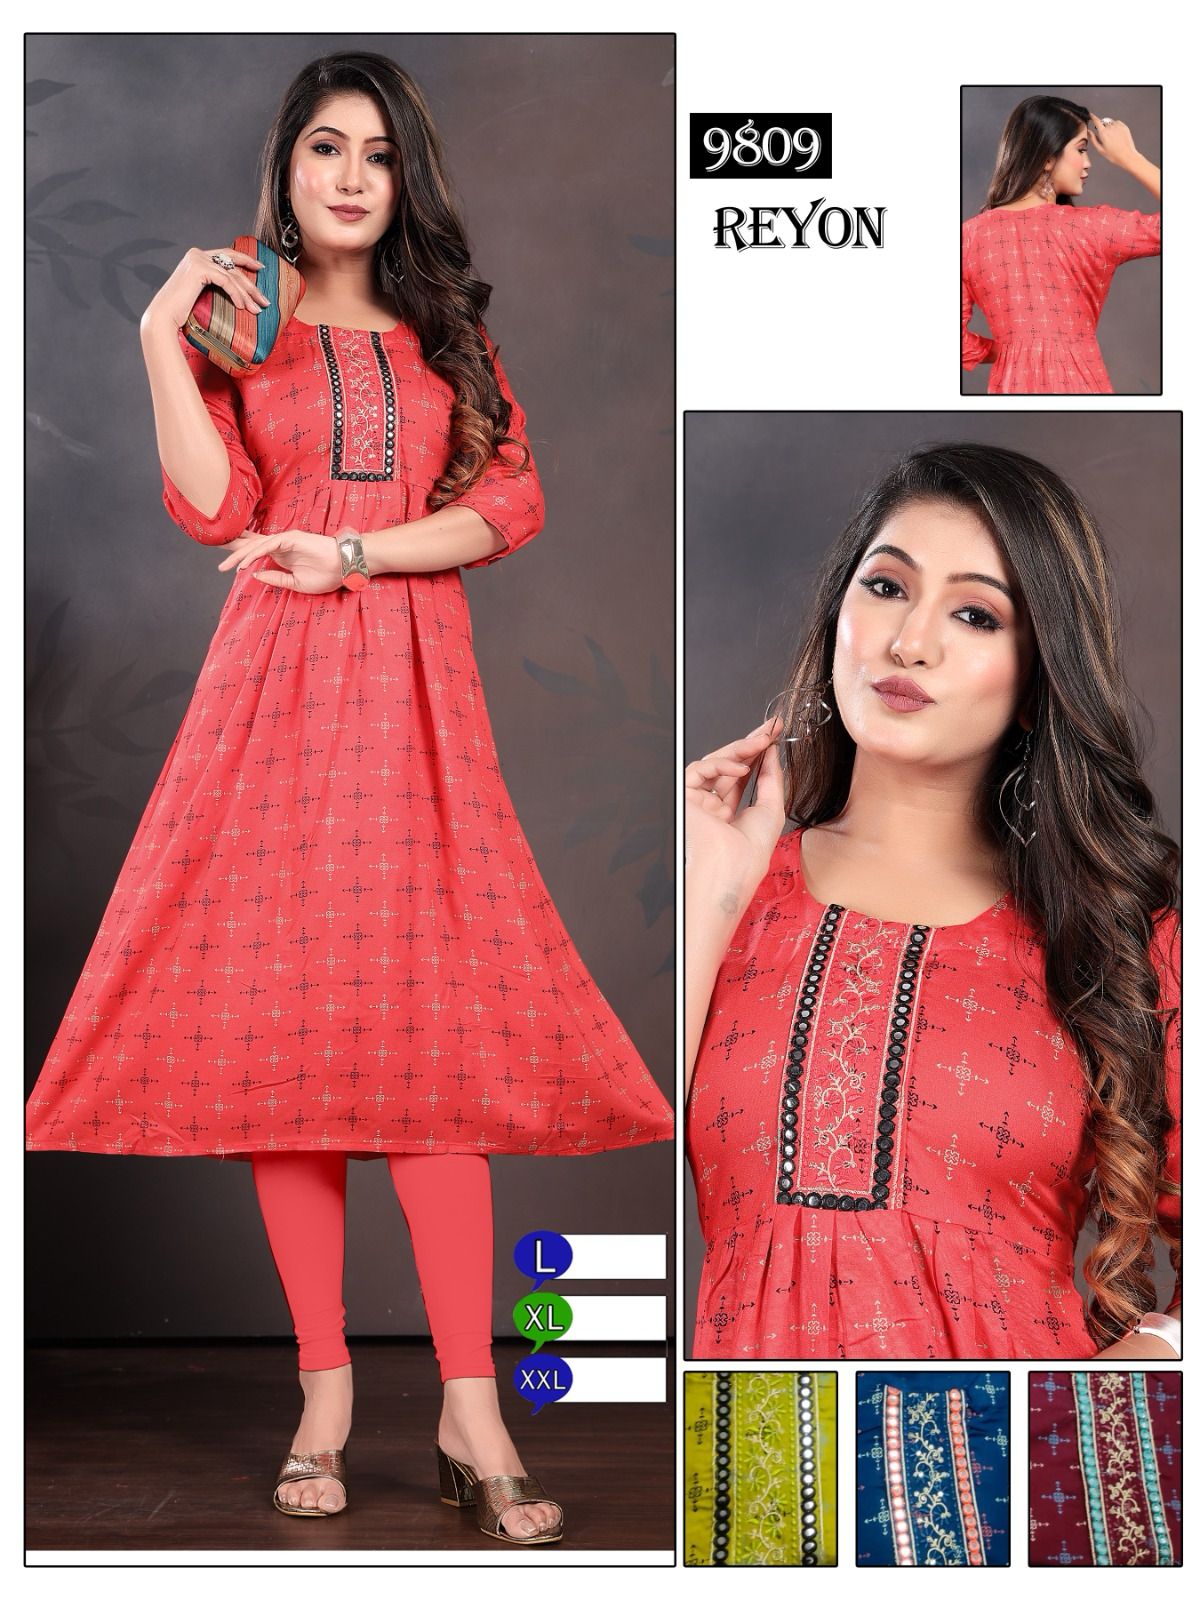 13 MUST HAVE STYLISH KURTI NECK DESIGNS FOR THE MODERN WOMAN